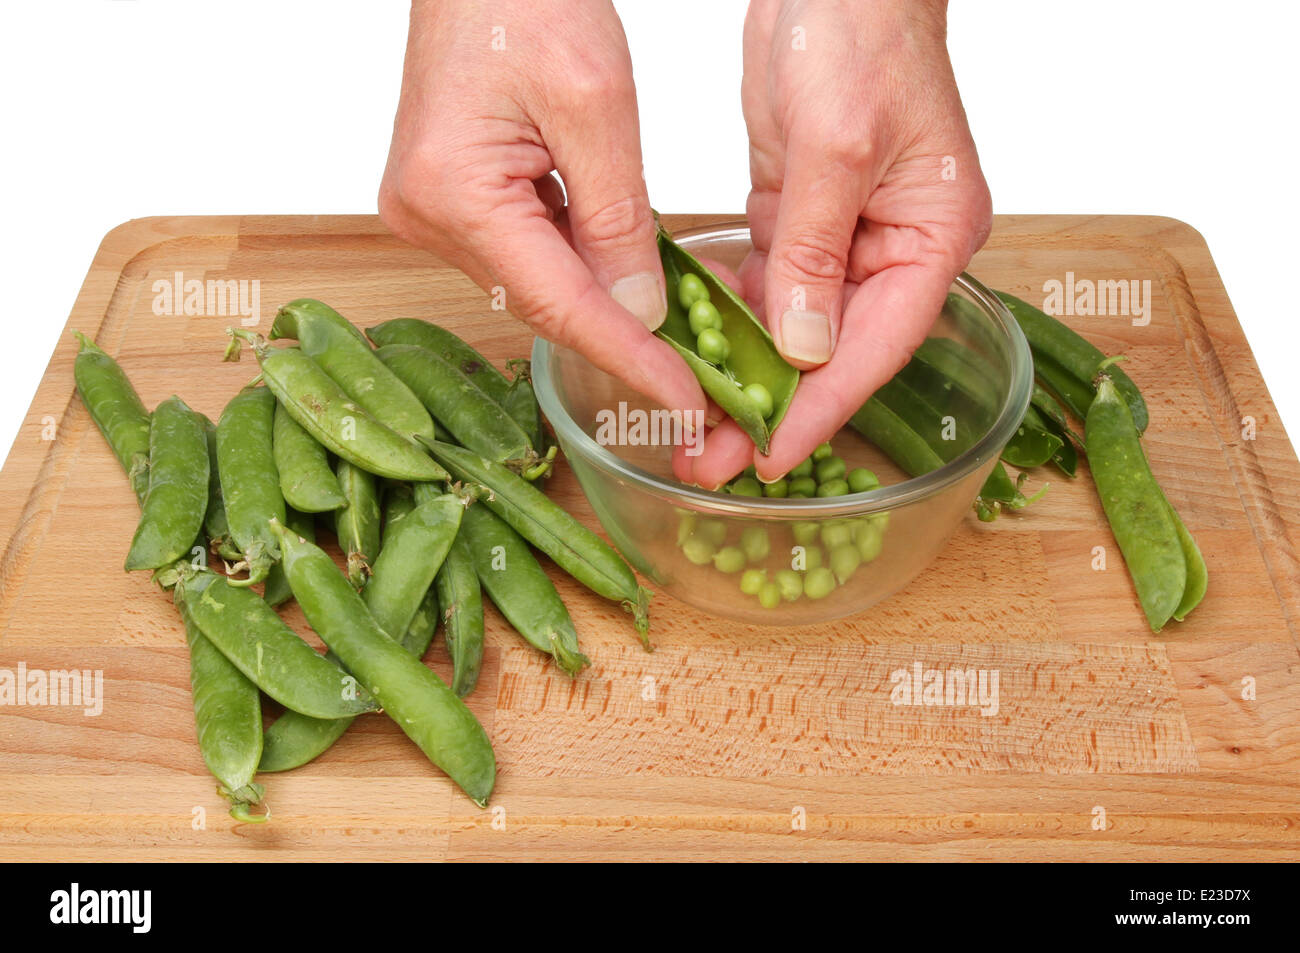 Hands shelling peas from pods into a glass bowl on a wooden board Stock Photo